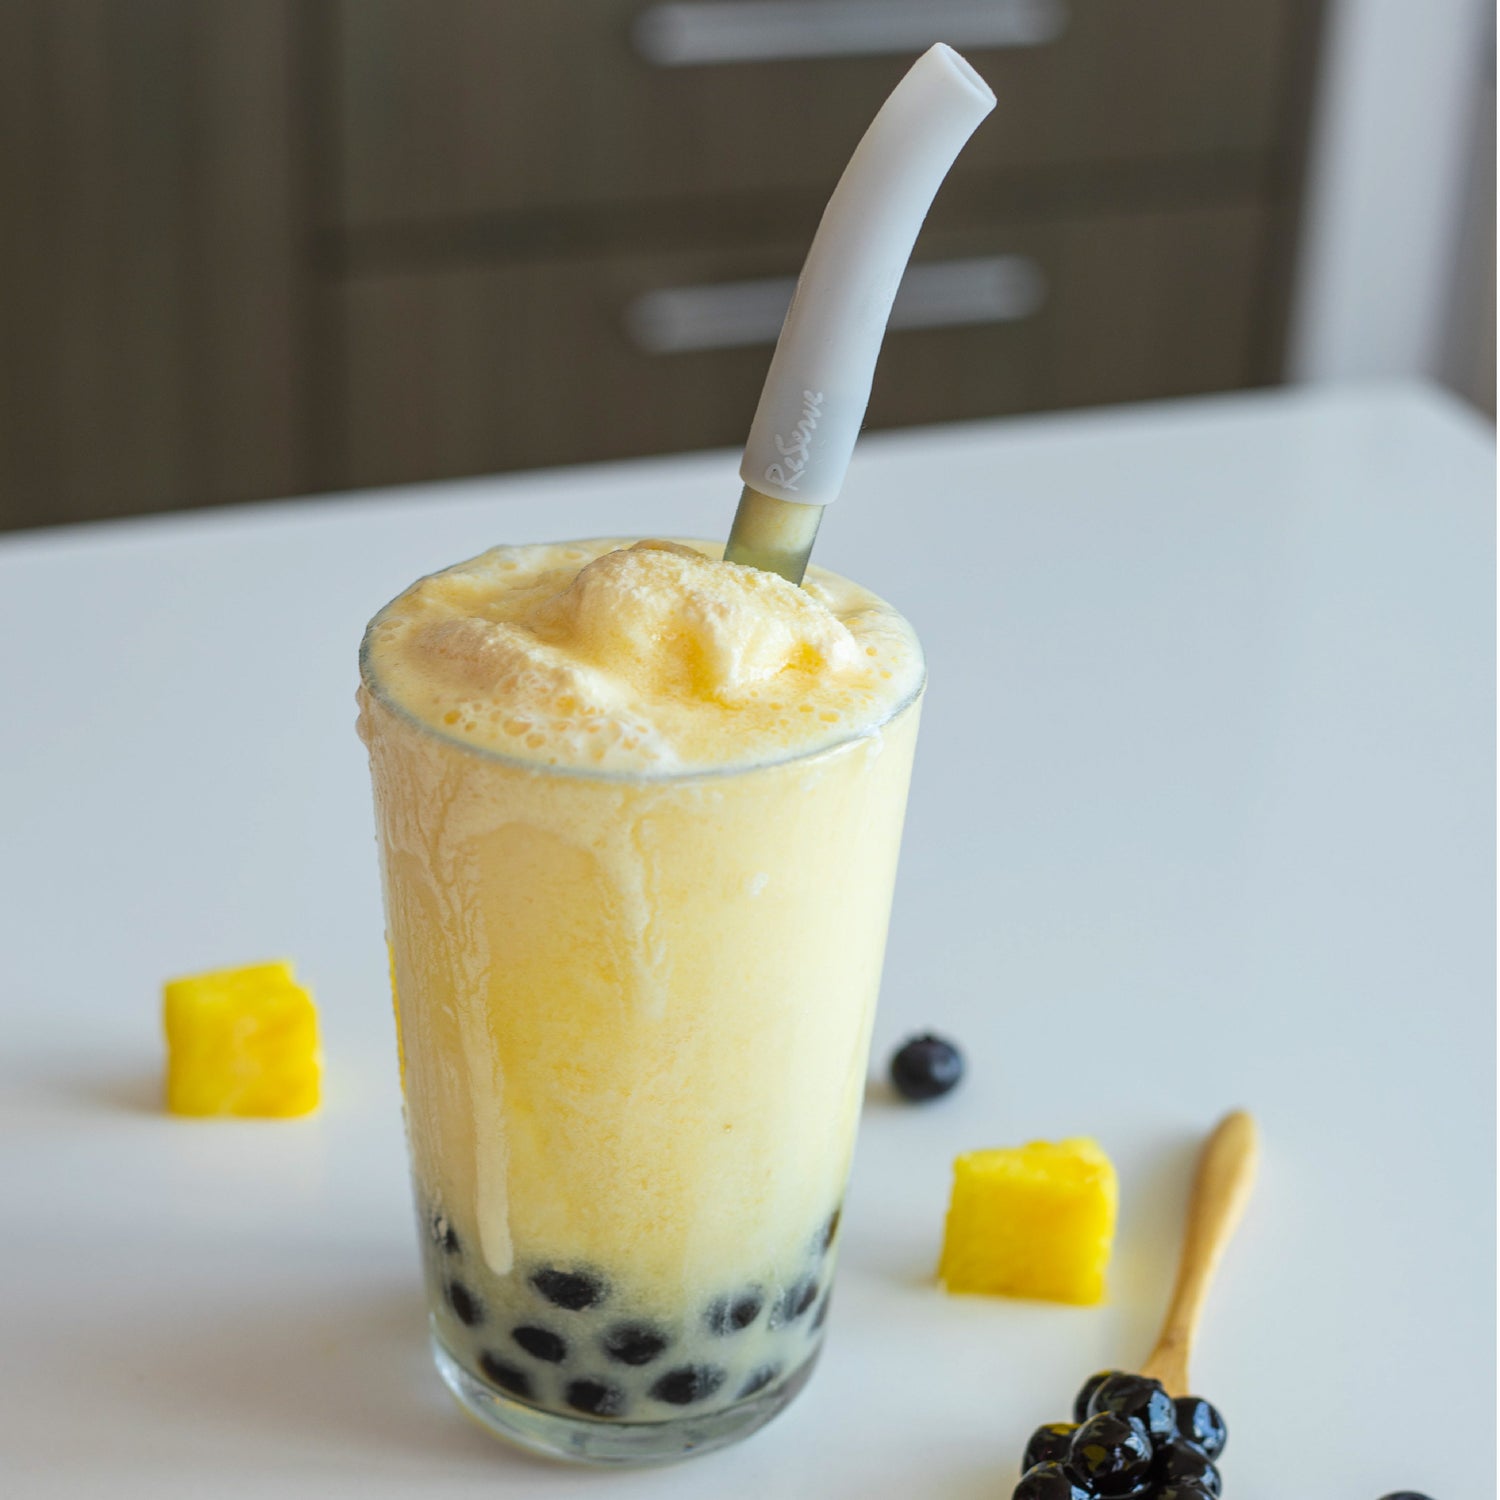 A glass of mango with silver bubble tea straws